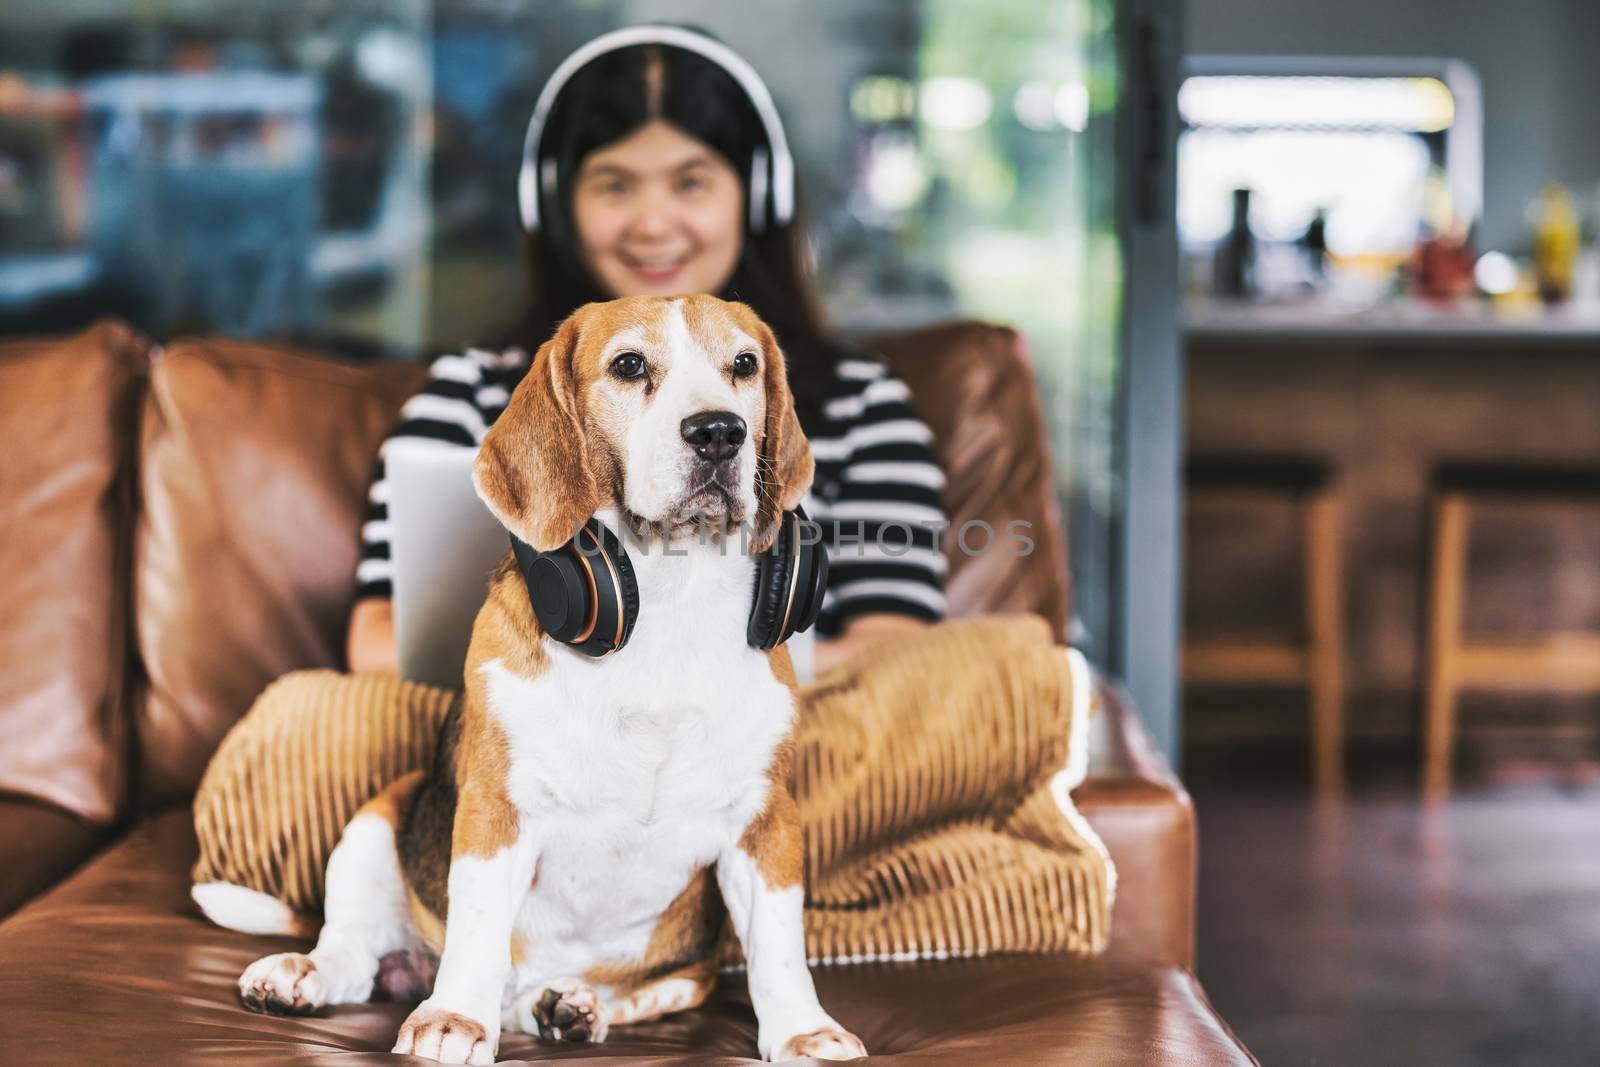 Closeup Beagle dog wearing headphone and sitting with Asian business woman using technology laptop and earphone for working from home in indoor house by video conference call, social distance concept